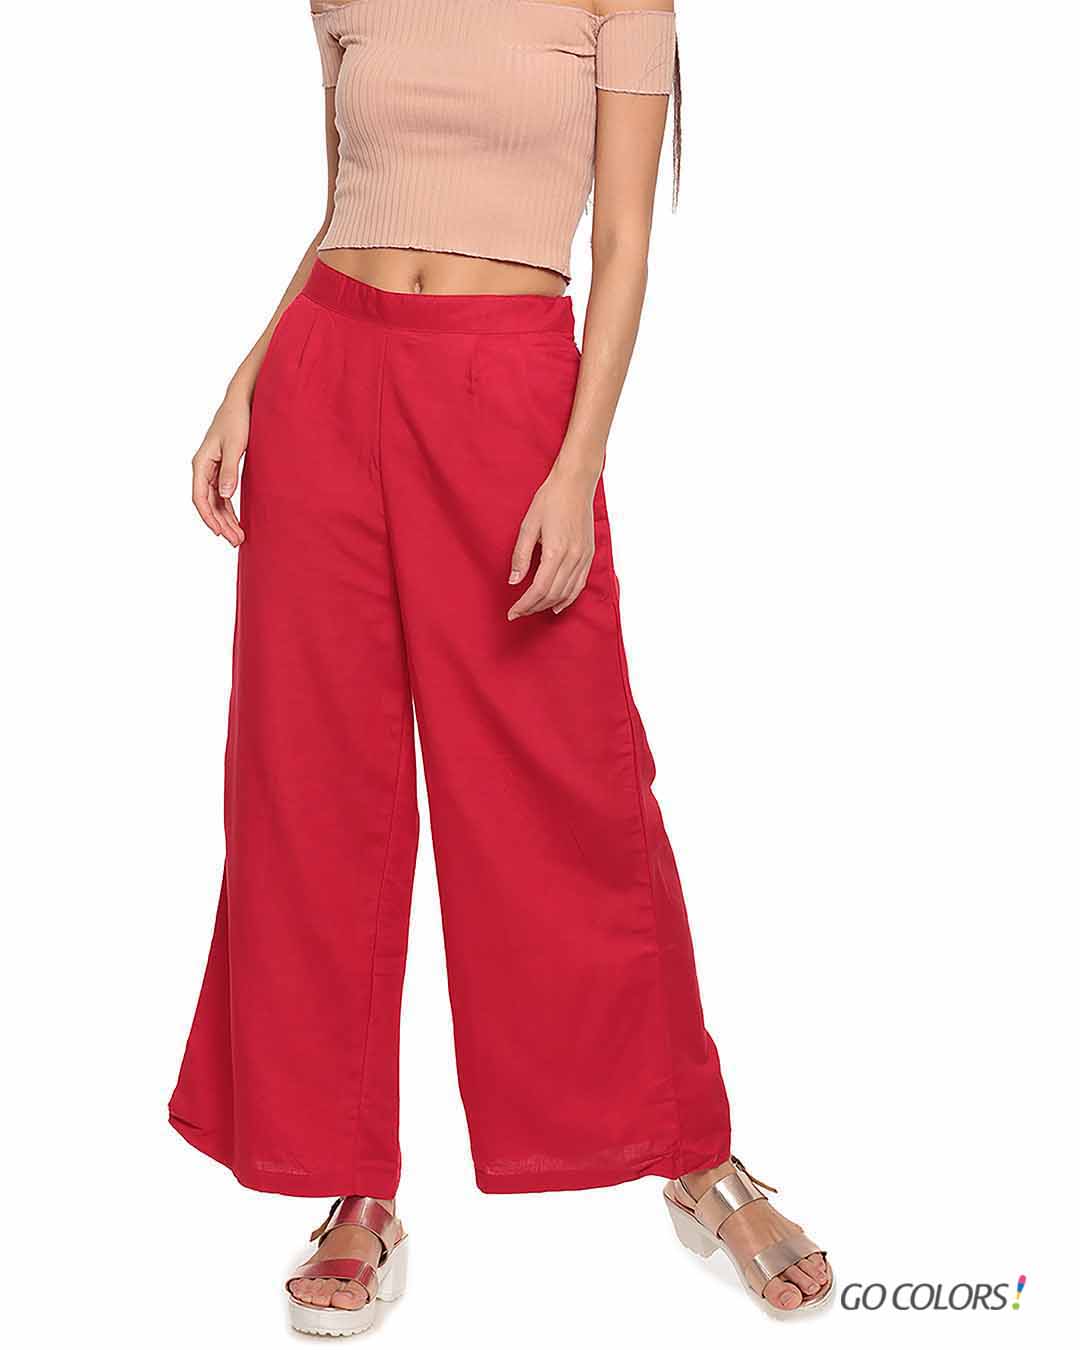 Buy GO COLORS Orange Womens Mid Rise Full Length Cargos | Shoppers Stop